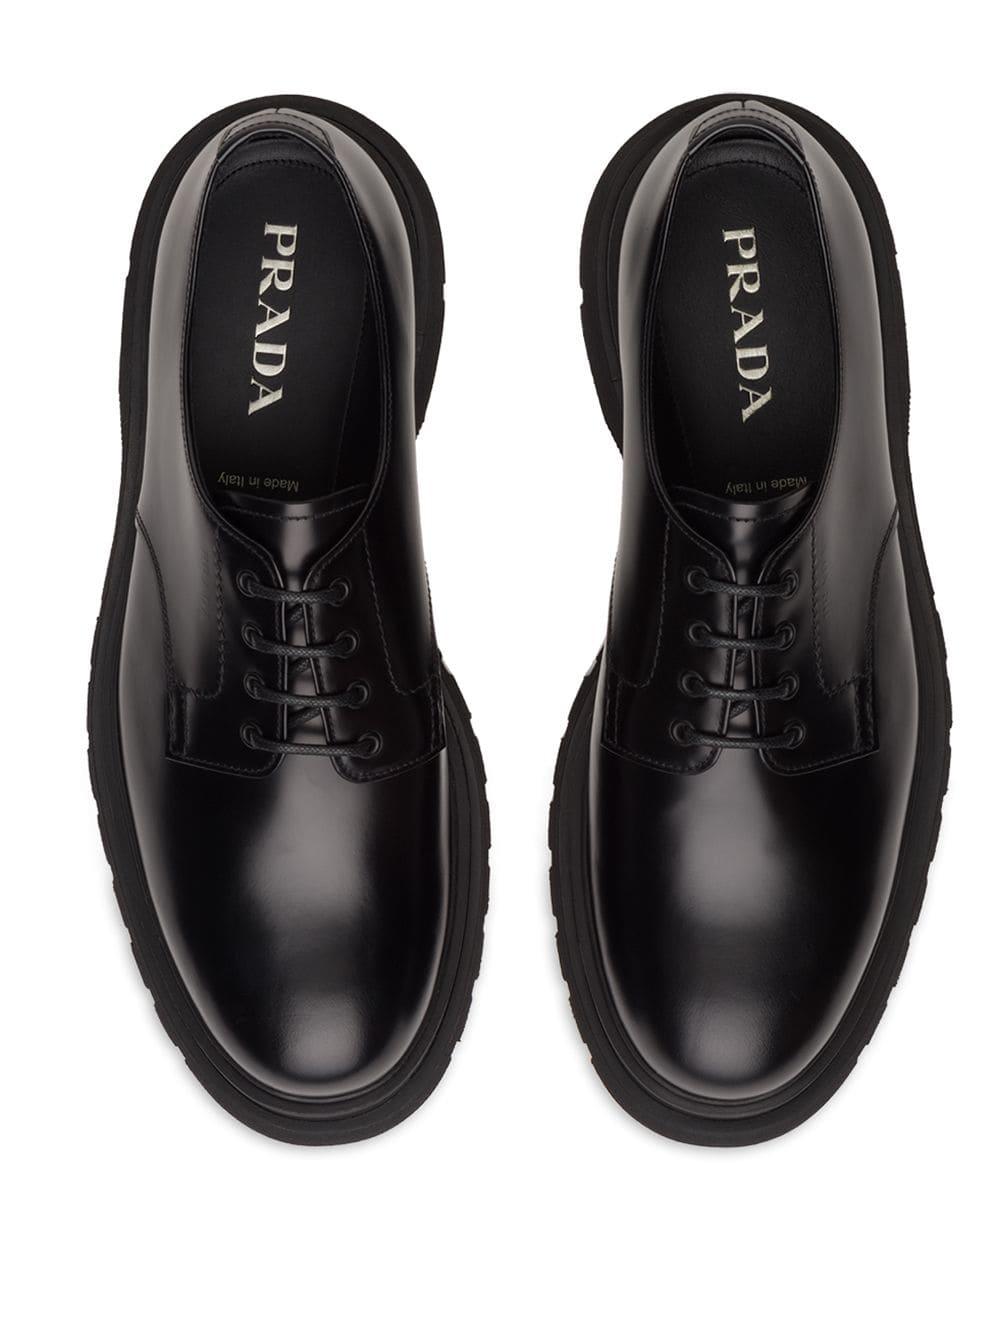 Prada Leather Lace-up Derby Shoes in Black for Men - Lyst